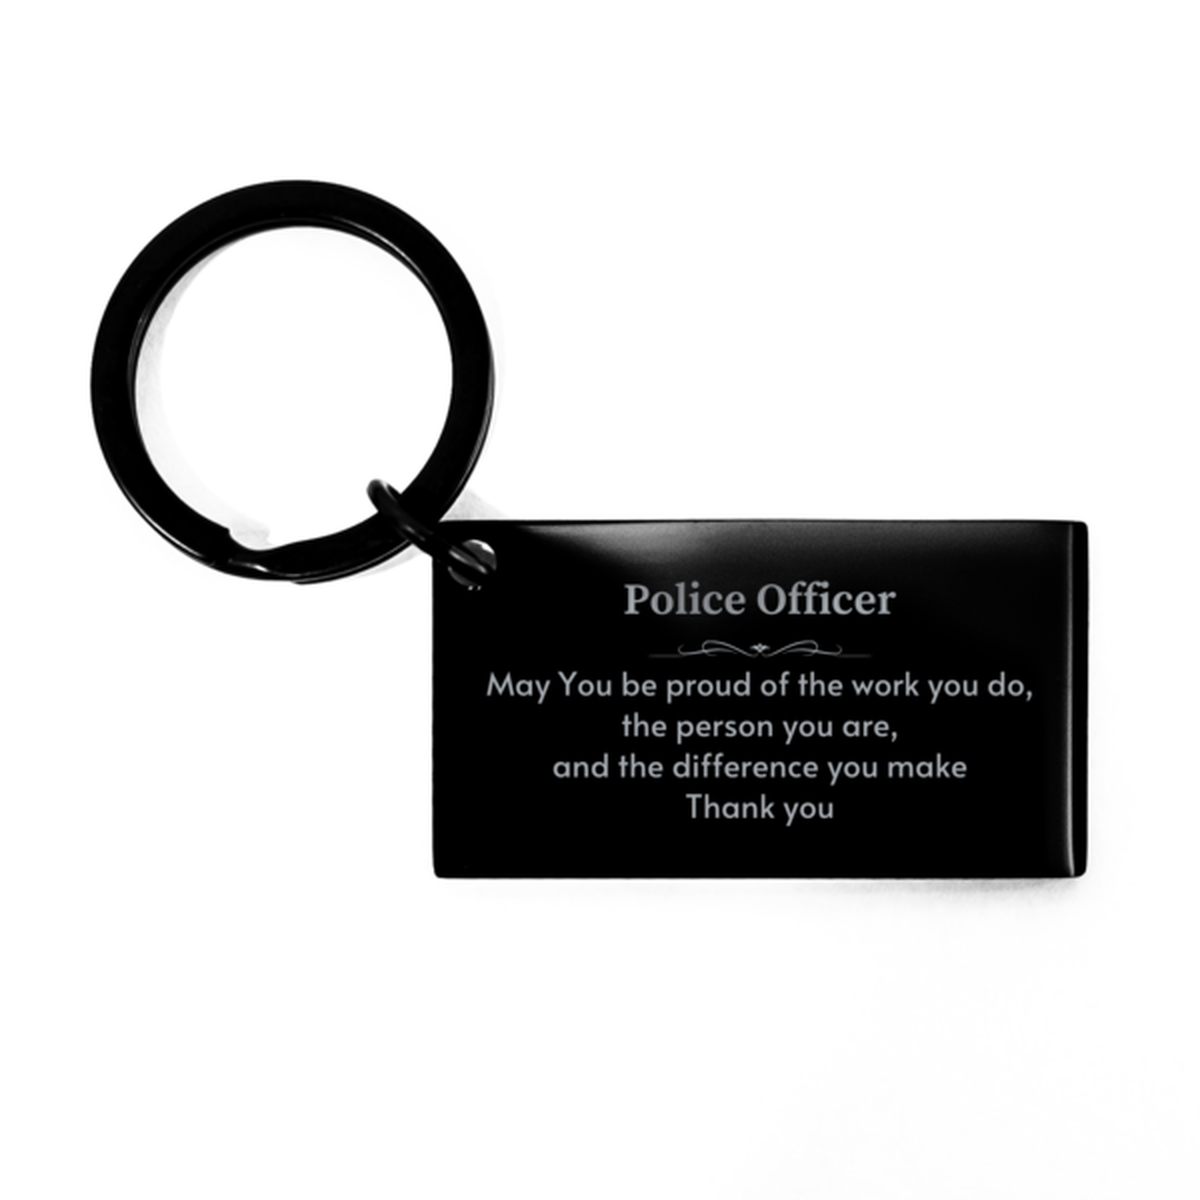 Heartwarming Keychain Retirement Coworkers Gifts for Police Officer, Secretary May You be proud of the work you do, the person you are Gifts for Boss Men Women Friends